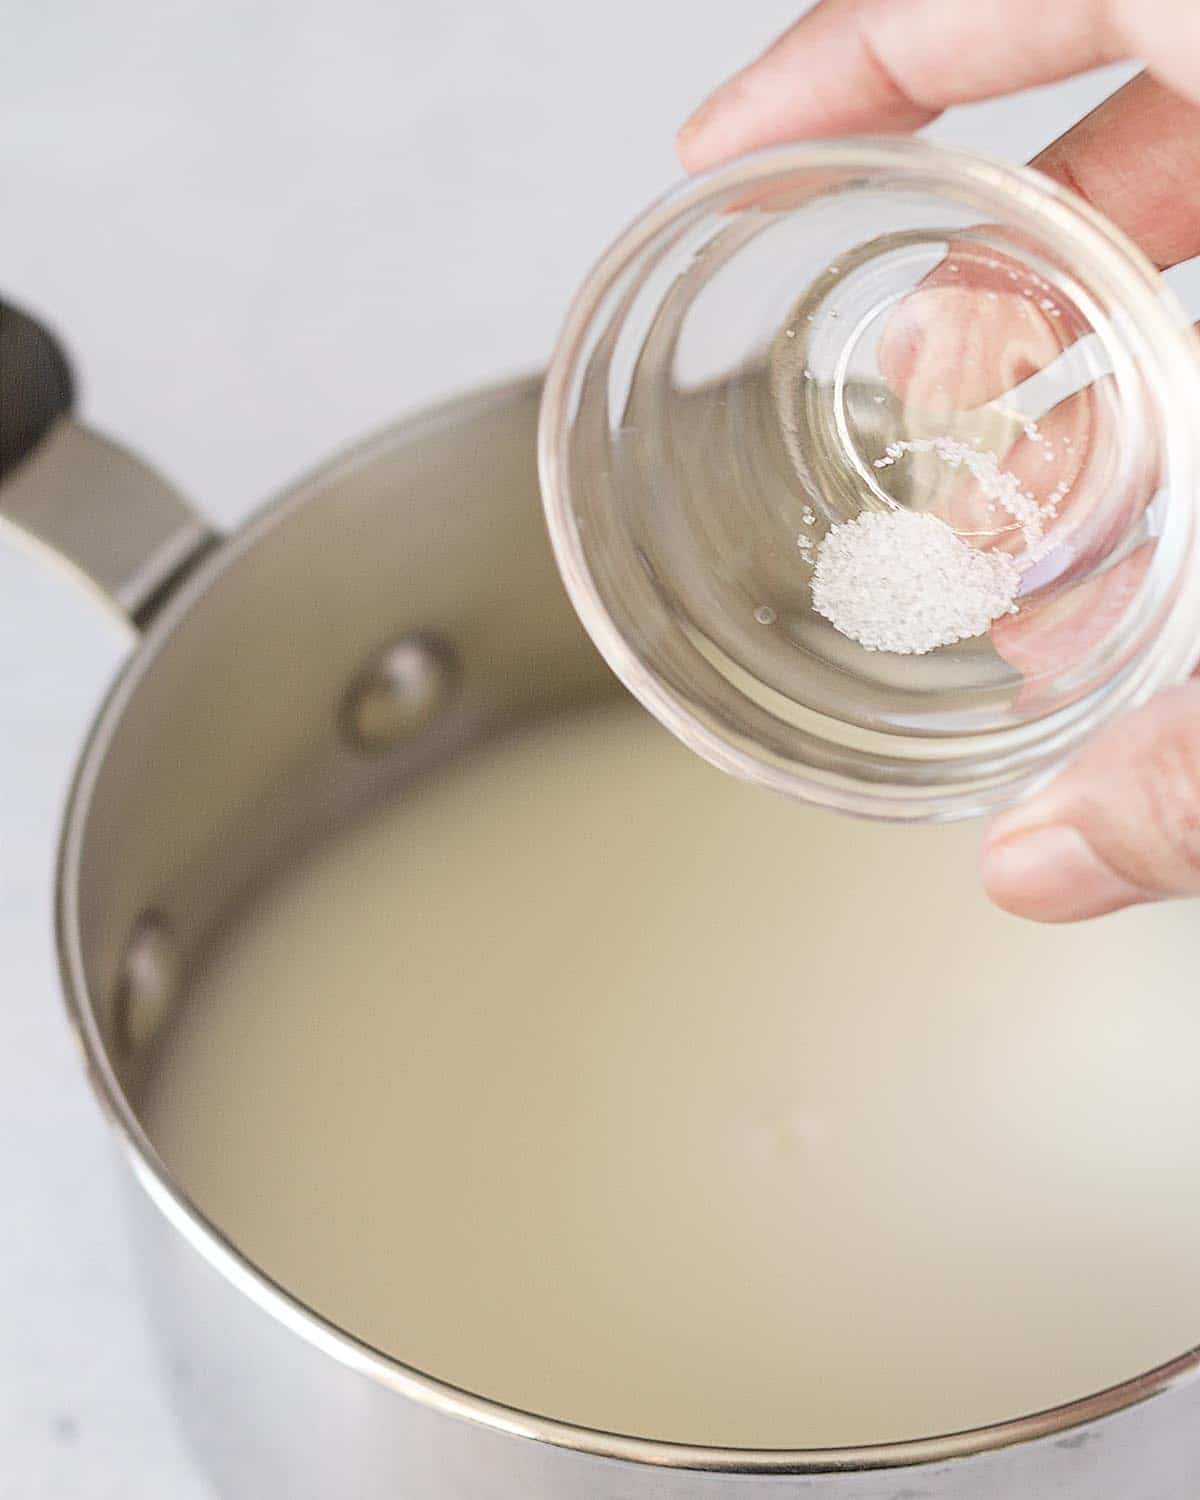 A hand adding a pinch of salt from a small glass bowl into a pot with milk and water to be used to make homemade oatmeal.